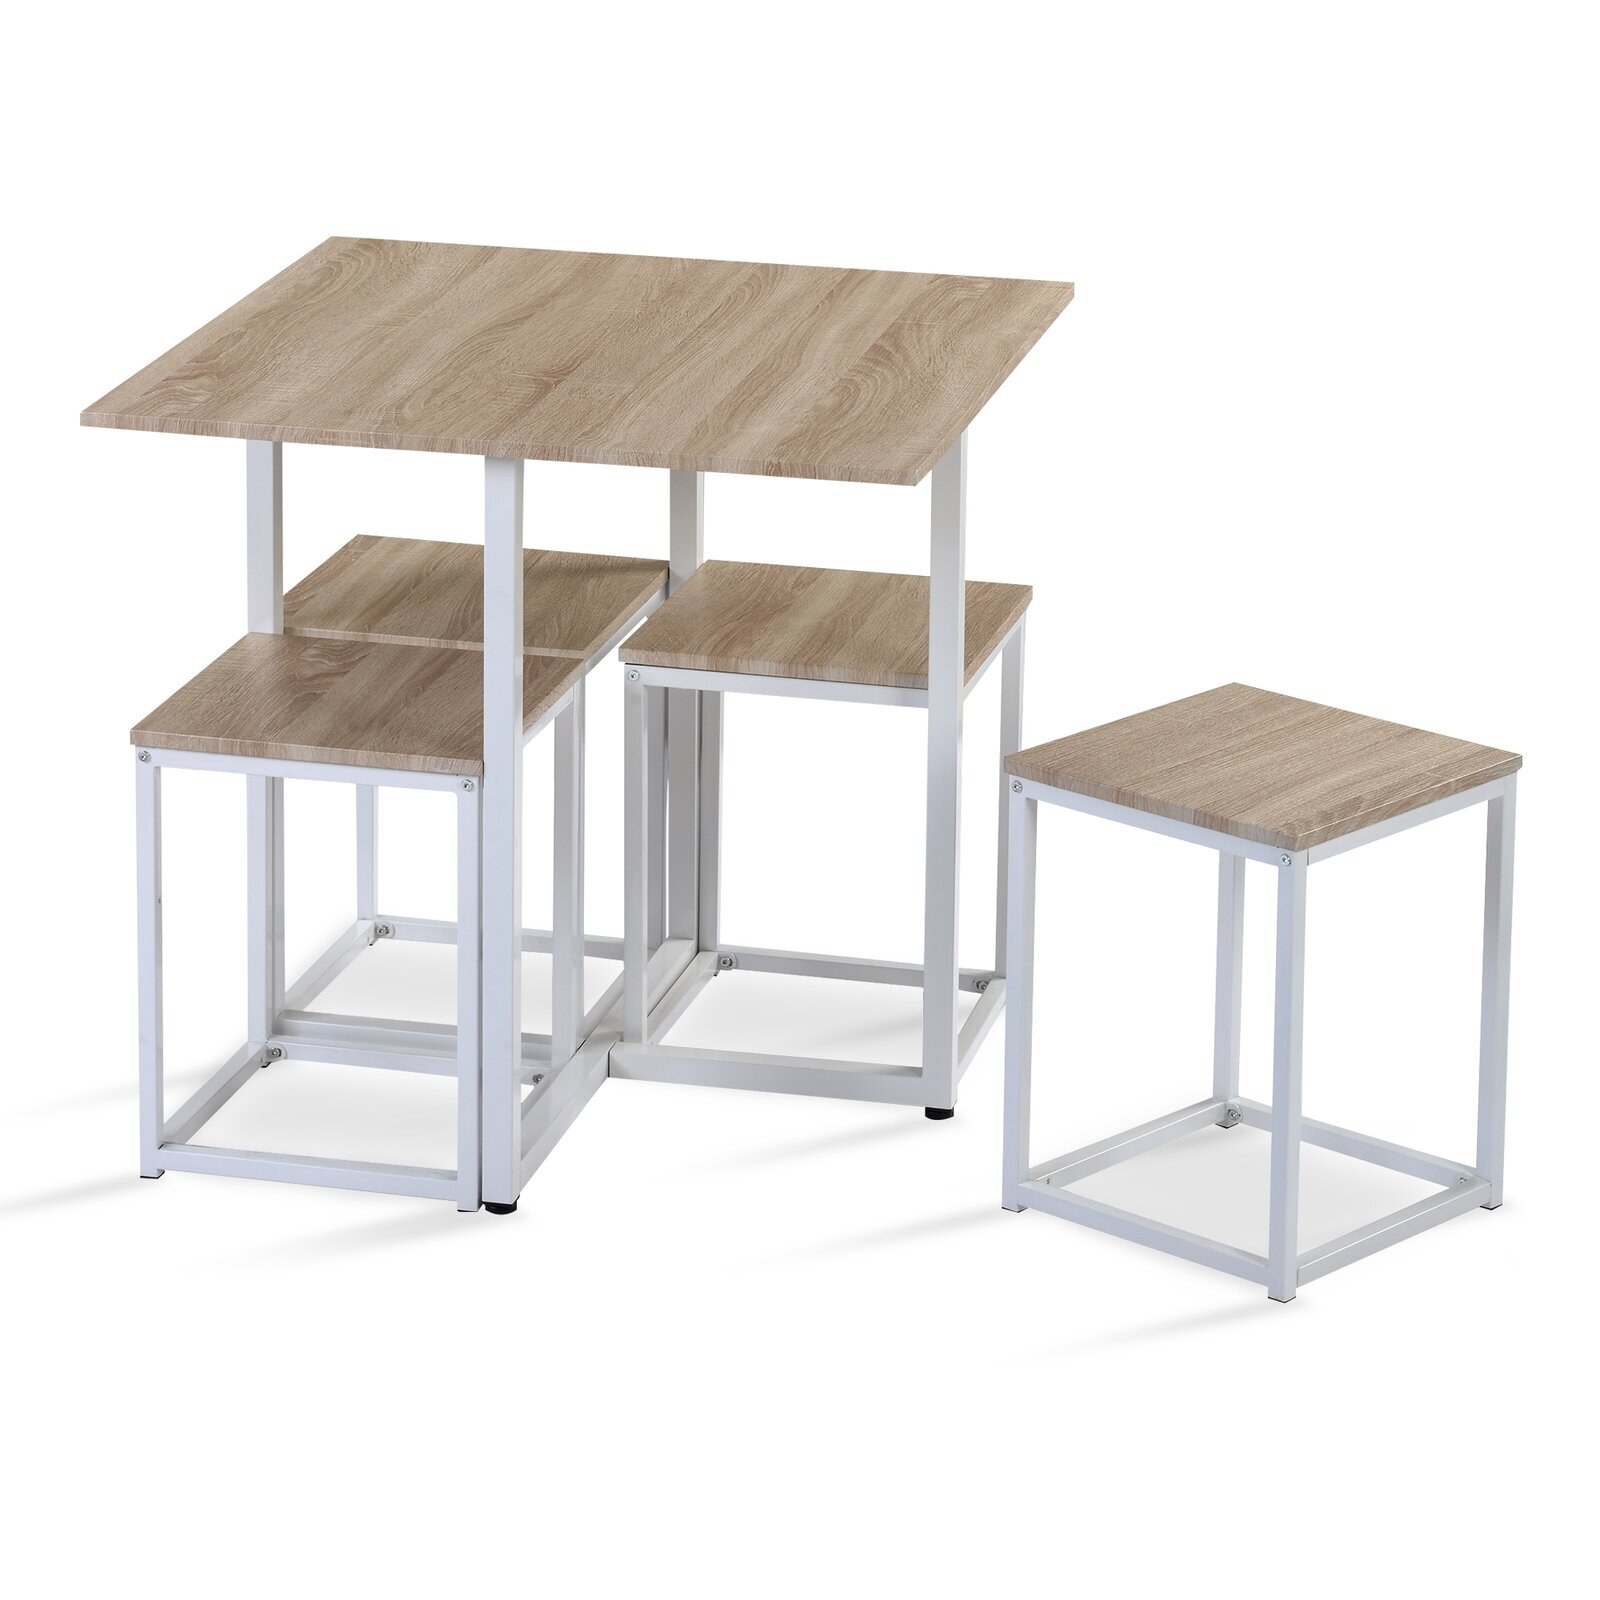 Cube Style Dinette Set With Stools